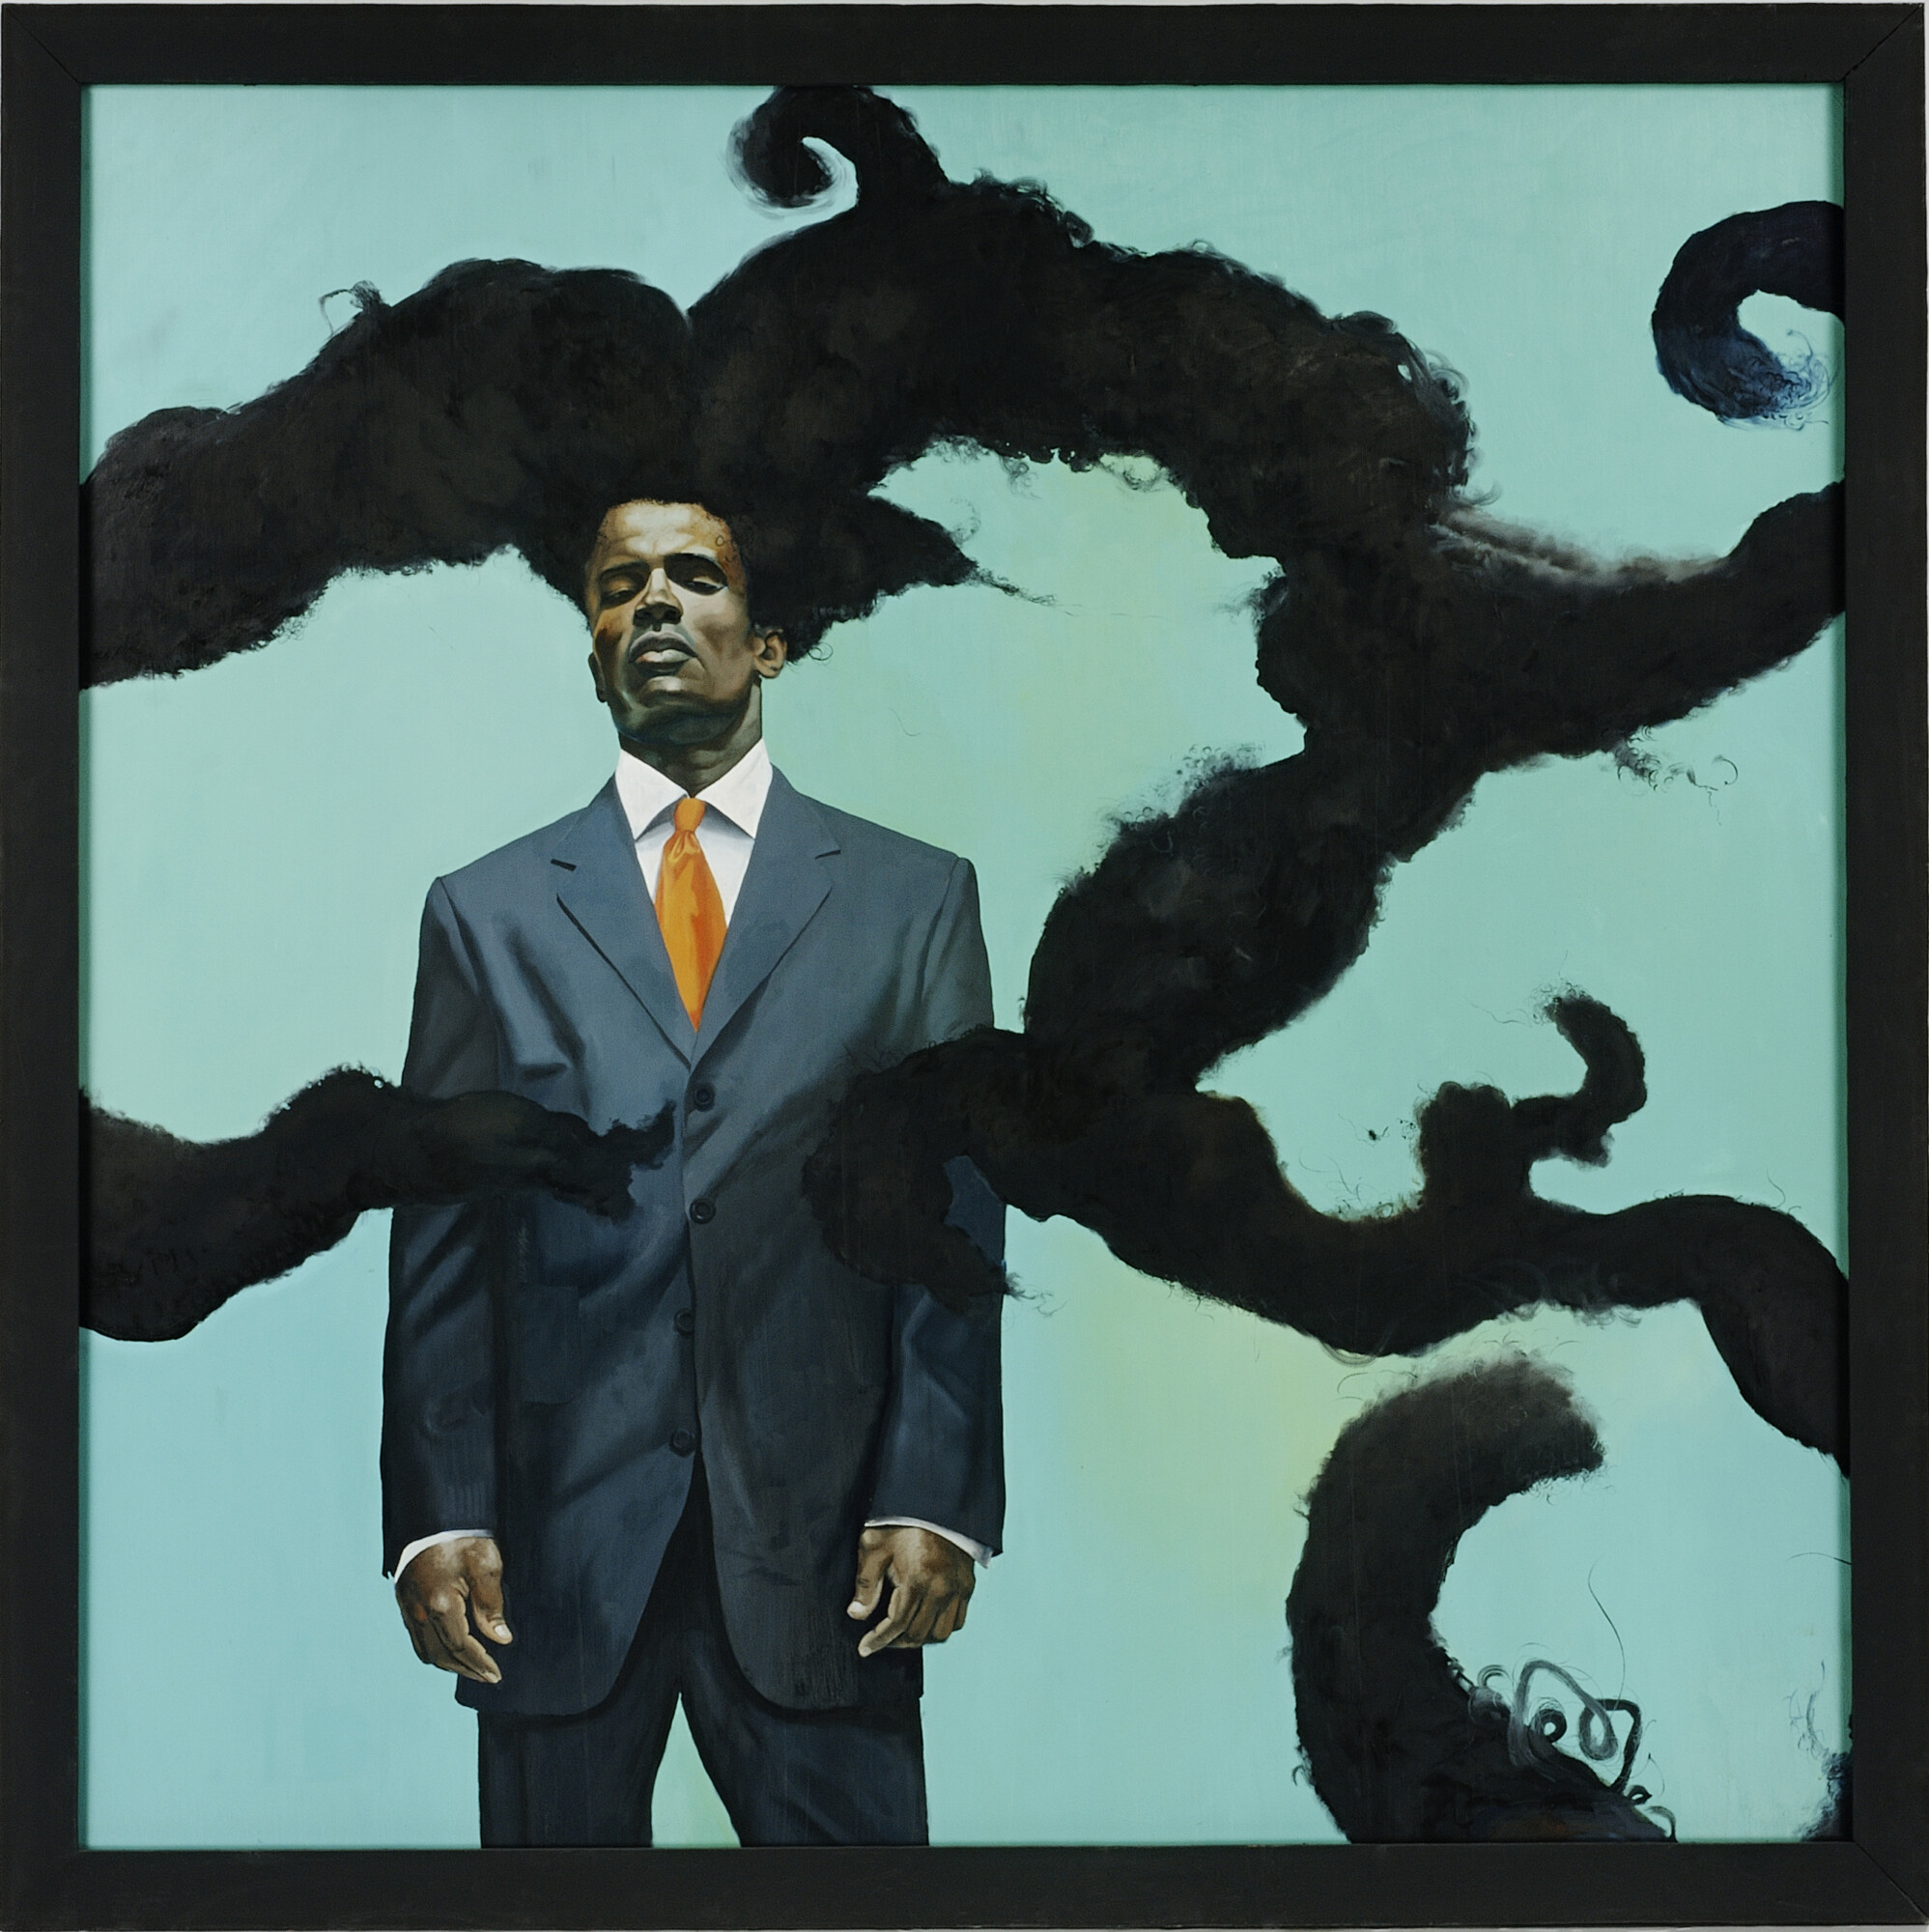 kehindewiley_a new republic_Conspicuous Fraud Series #1 (Eminence)